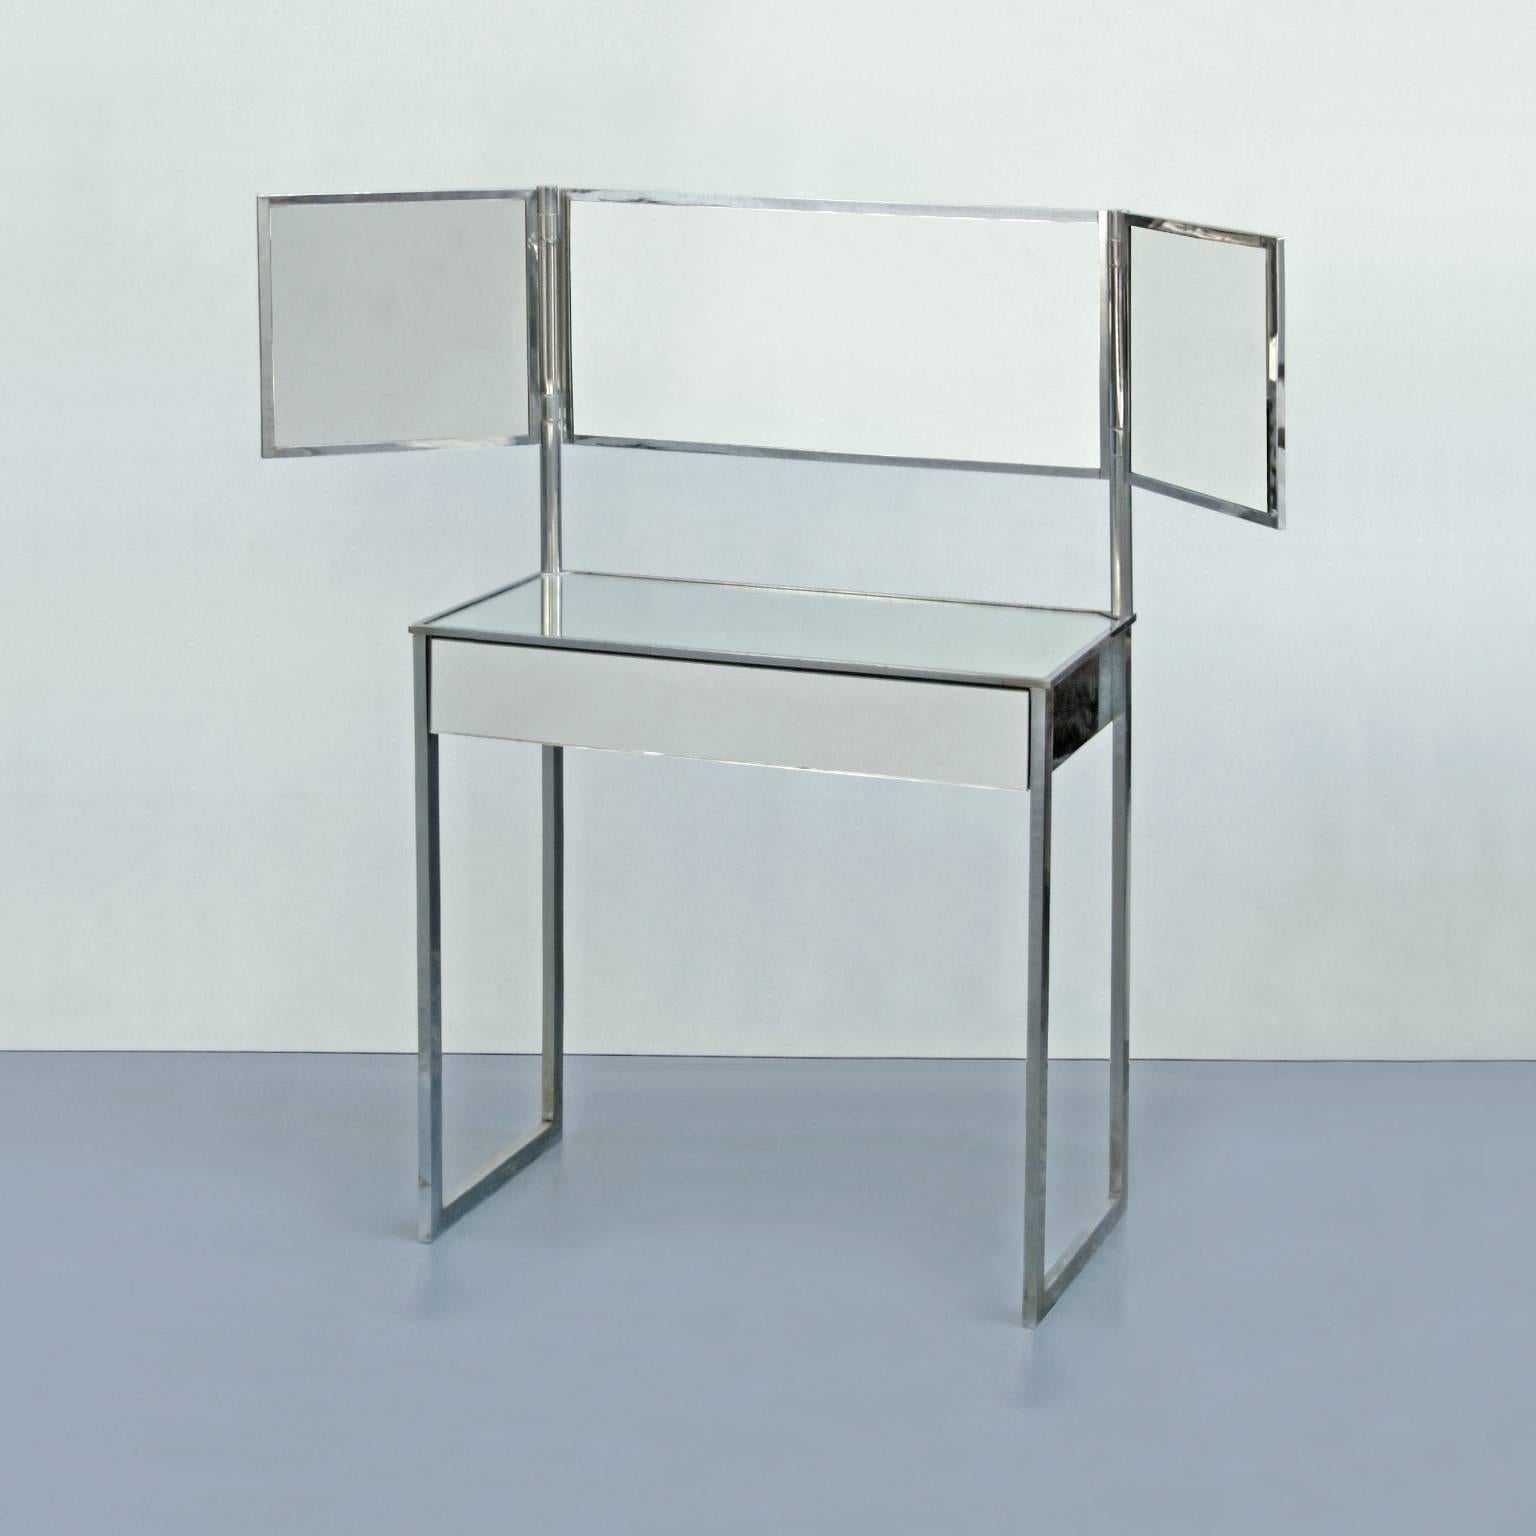 Mirrored dressing table in German modernism style, circa 1930.